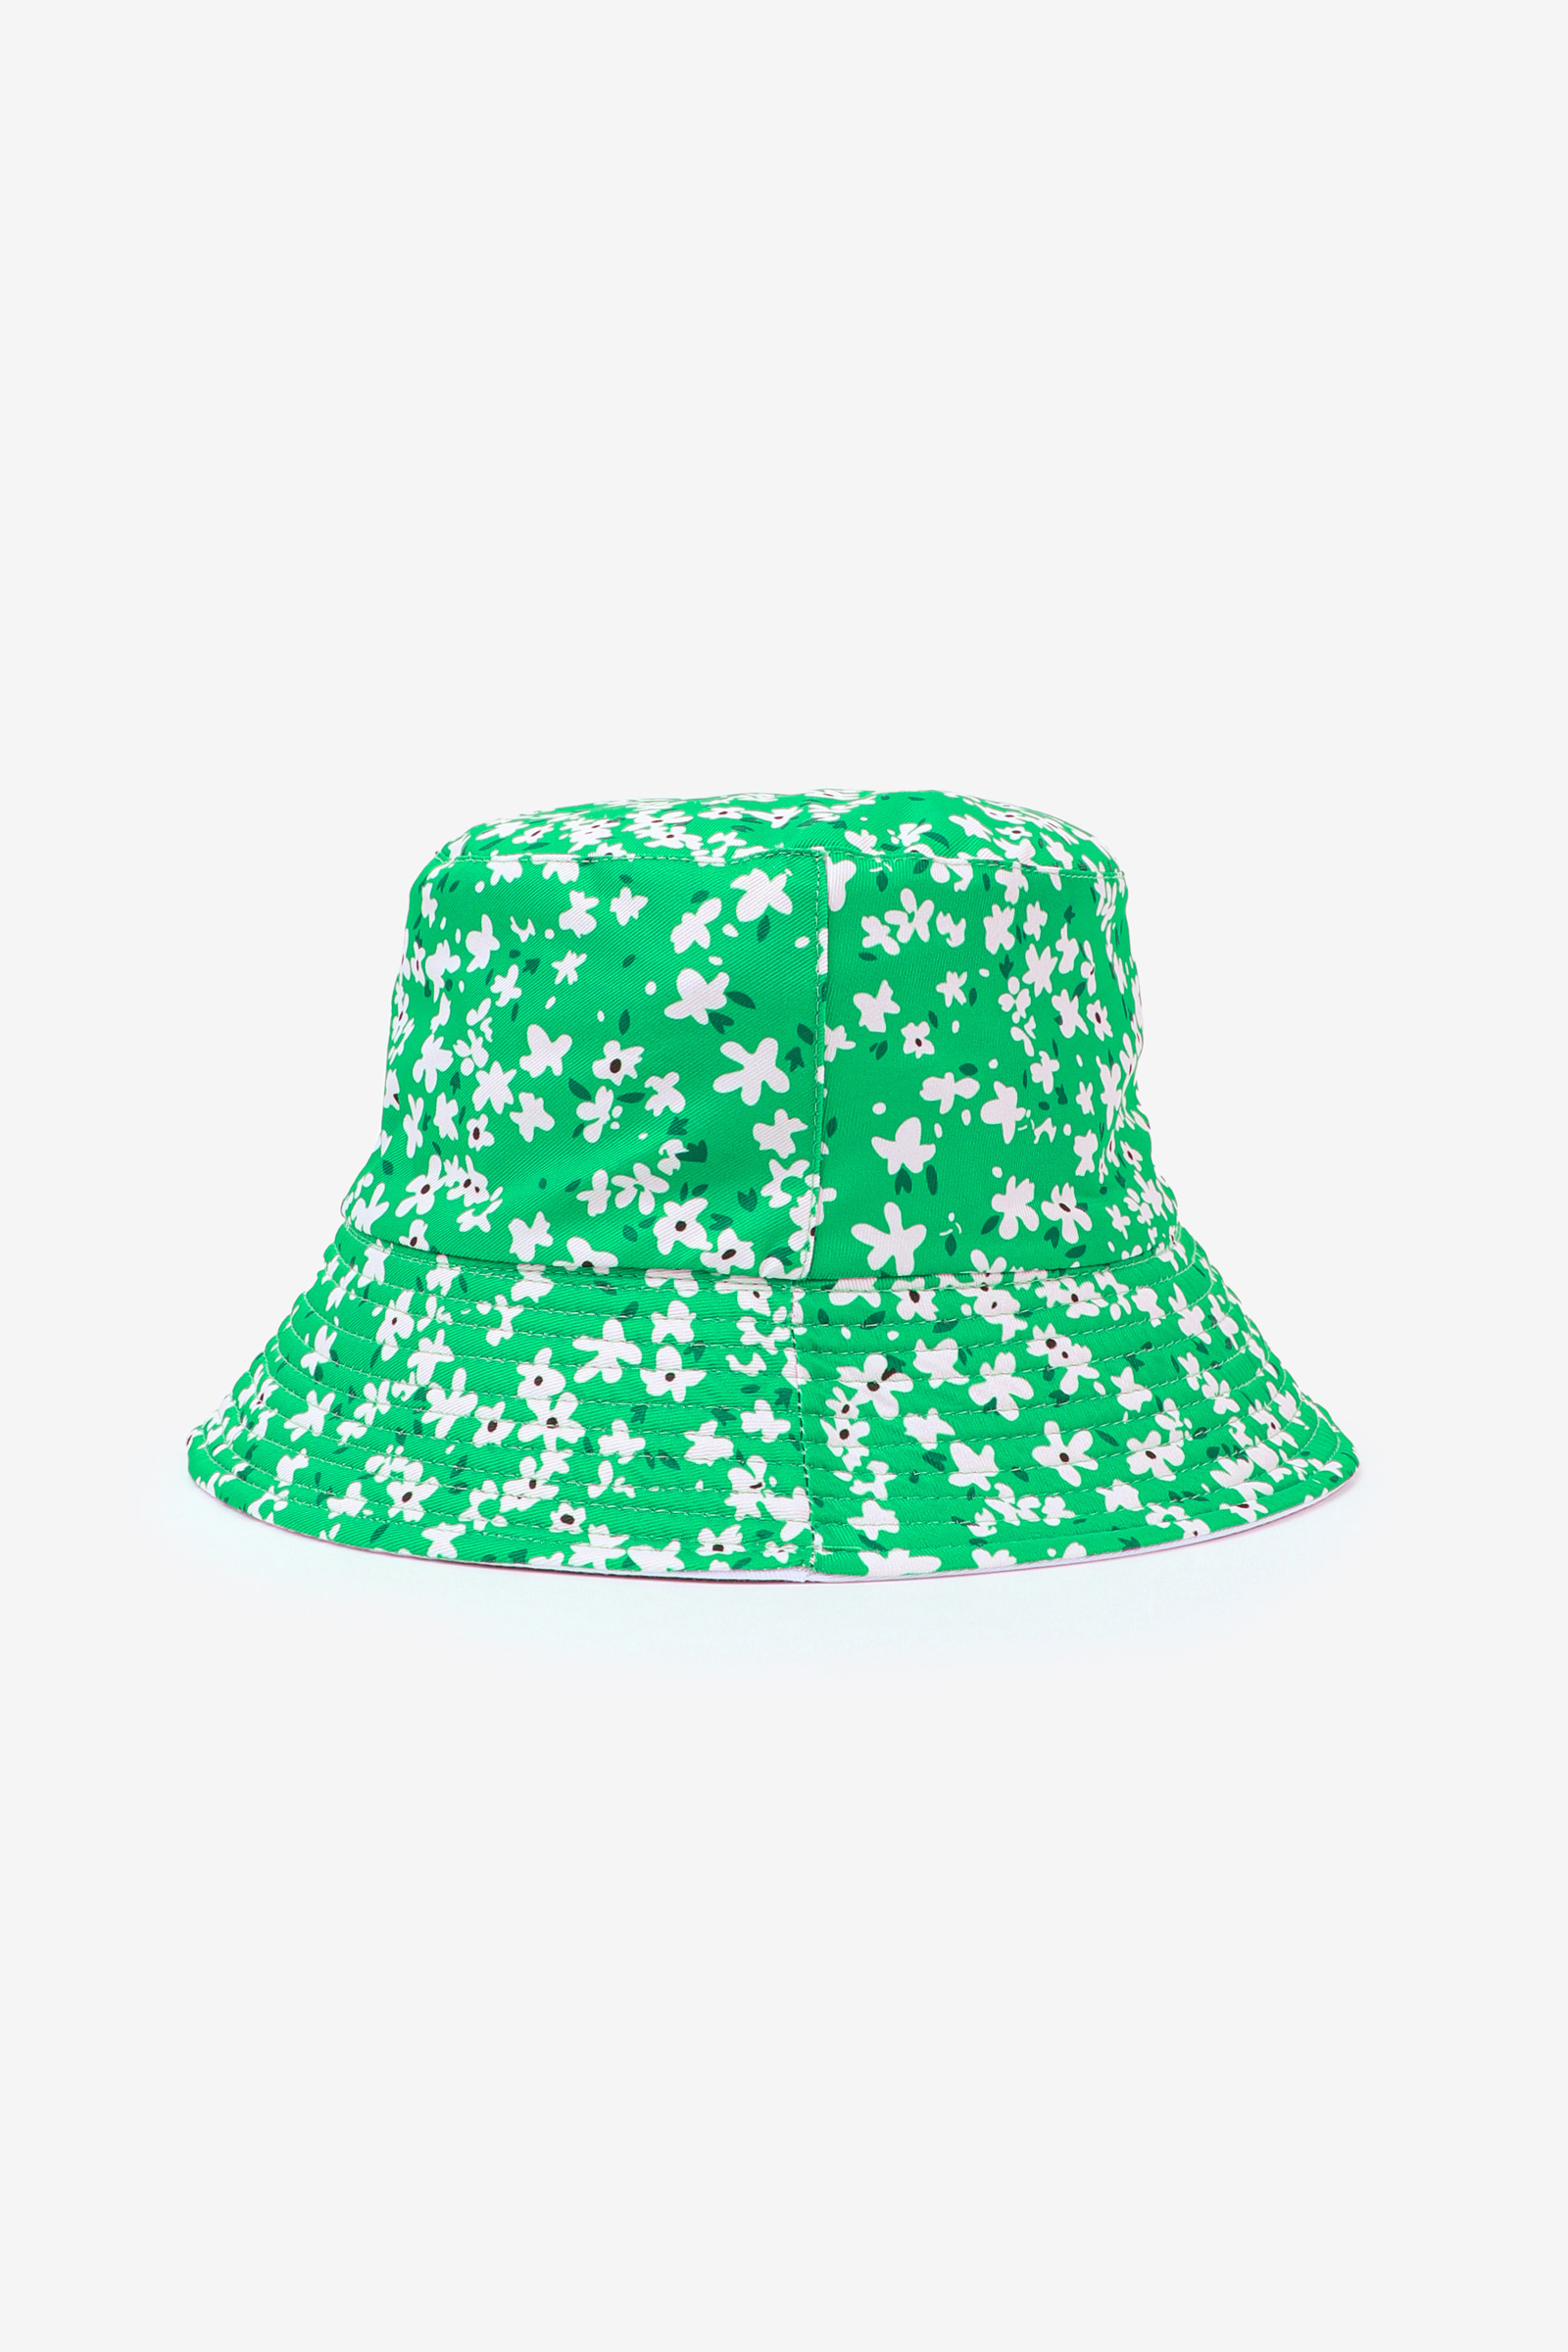 Ardene Daisy Floral Bucket Hat in Green | Polyester/Cotton